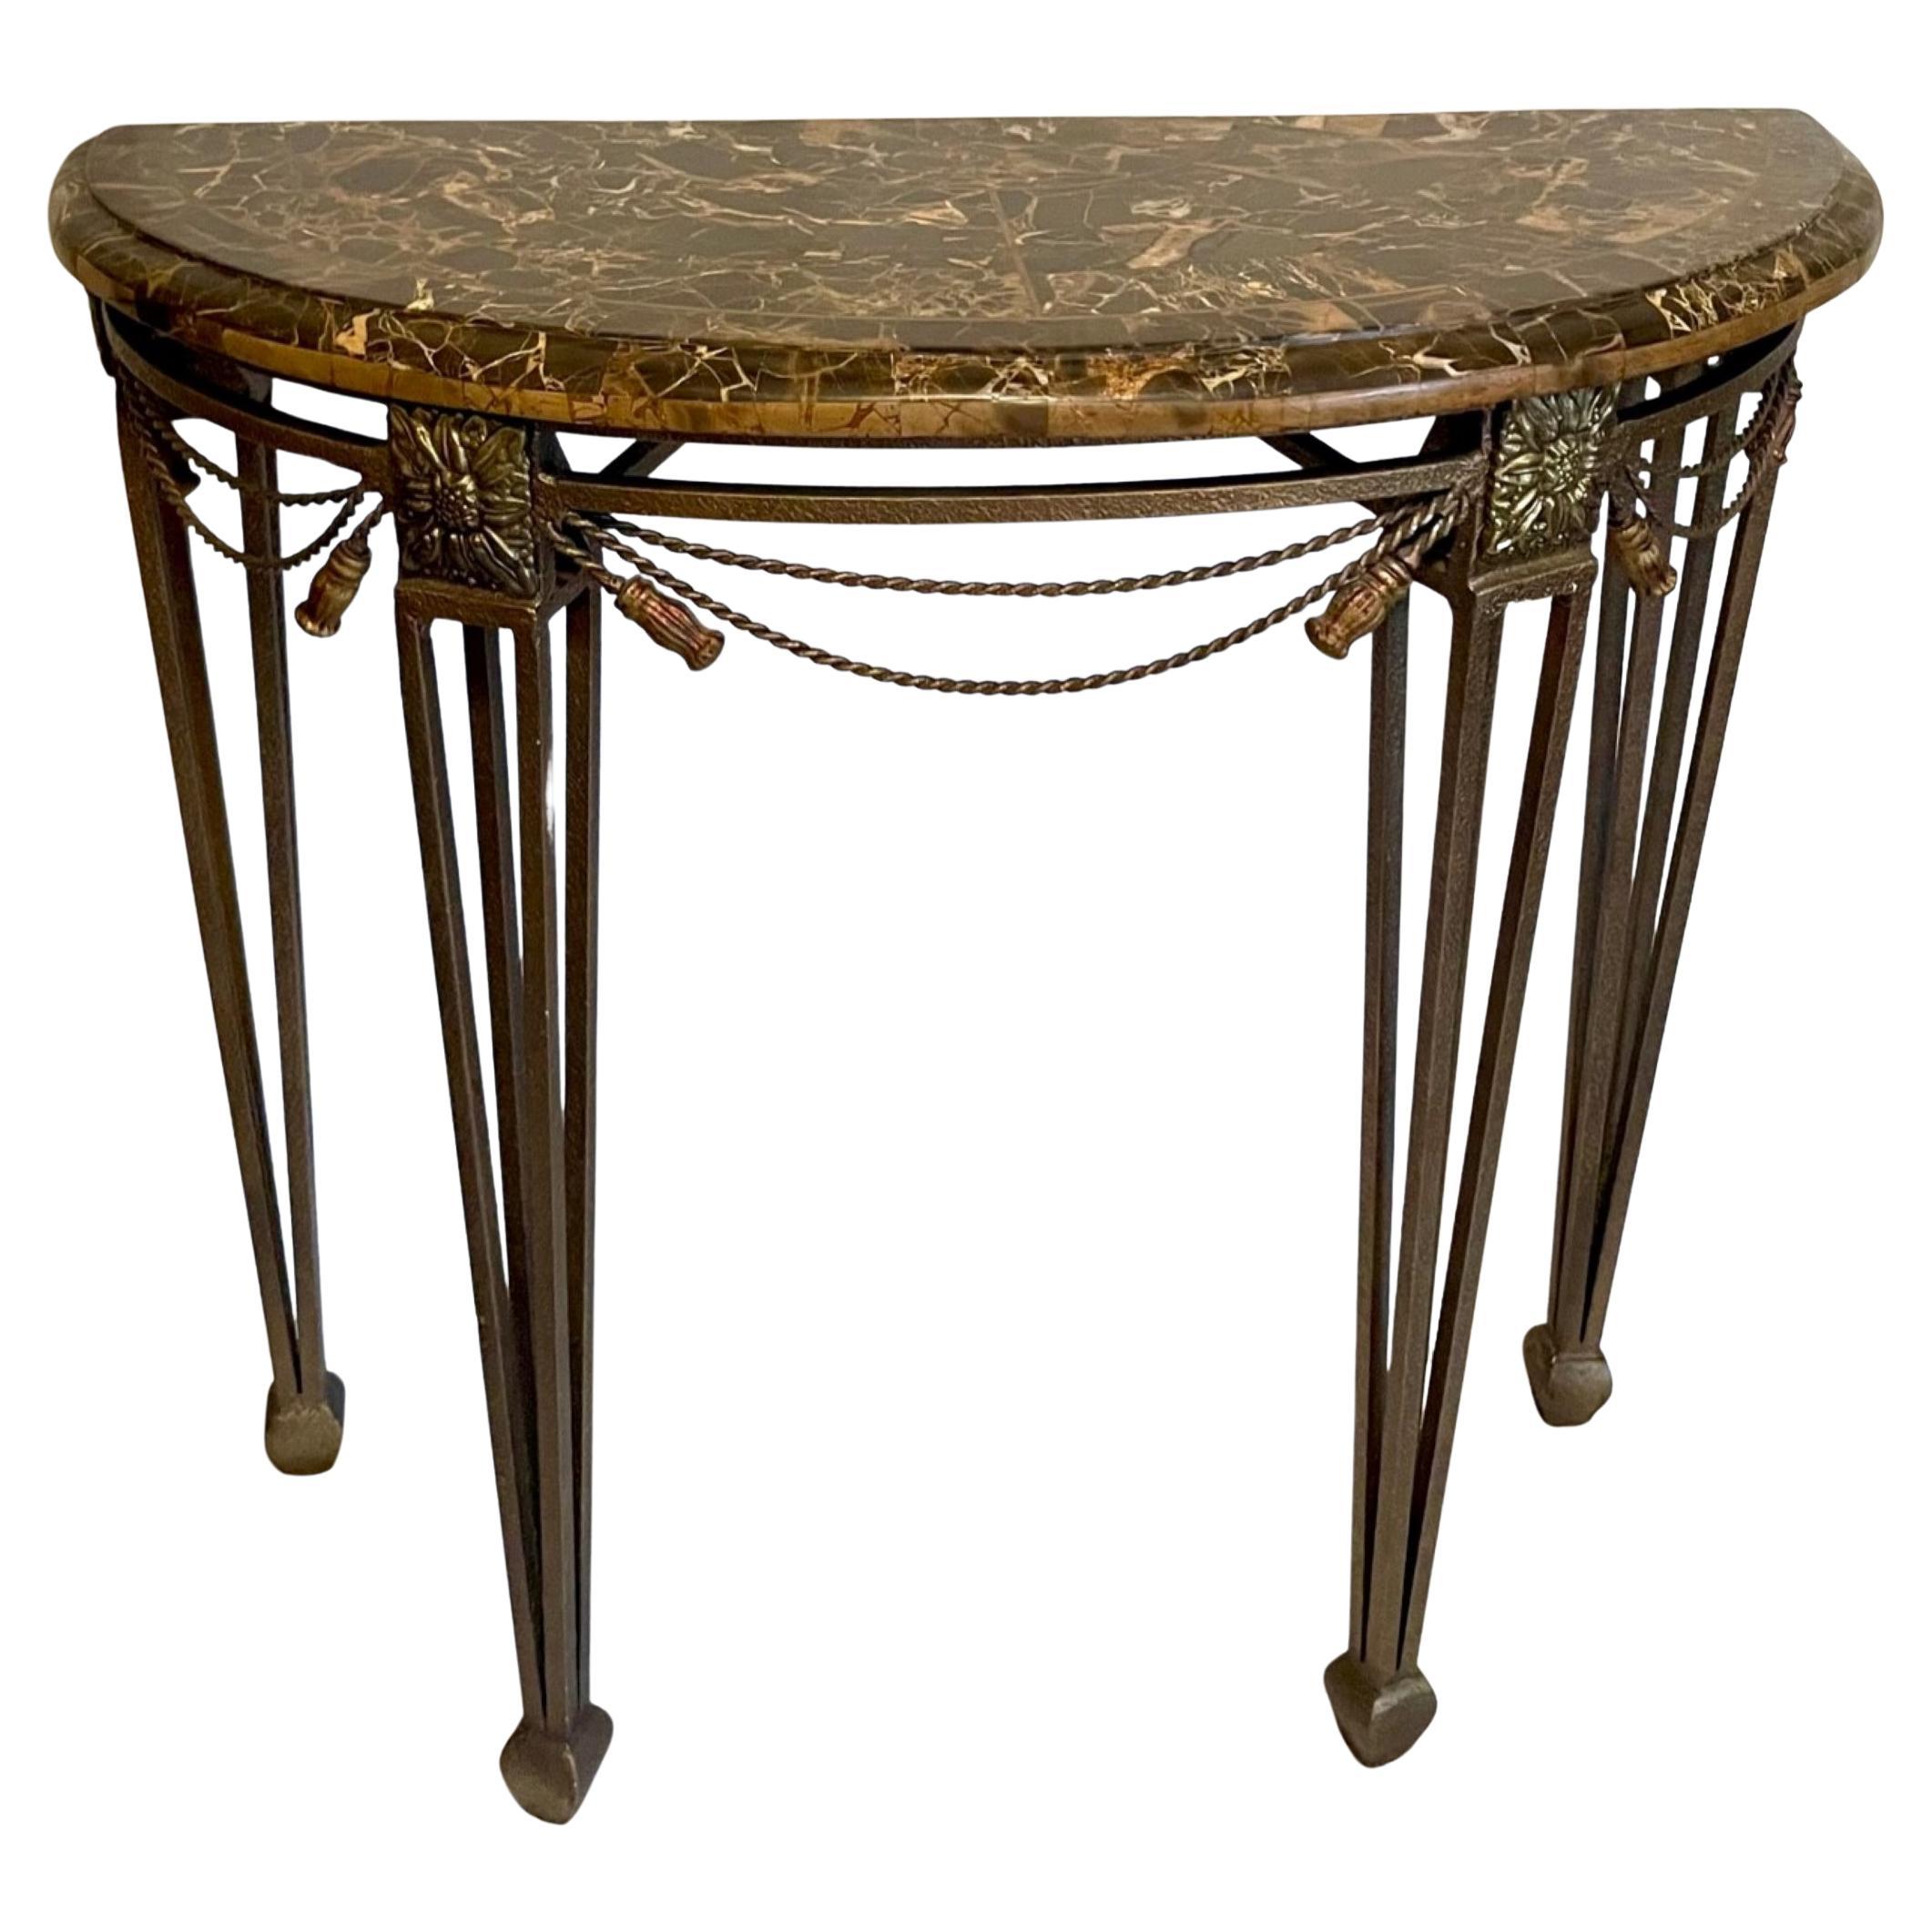 Wrought Iron Demilune Marble Top Console Table After Oscar Bach